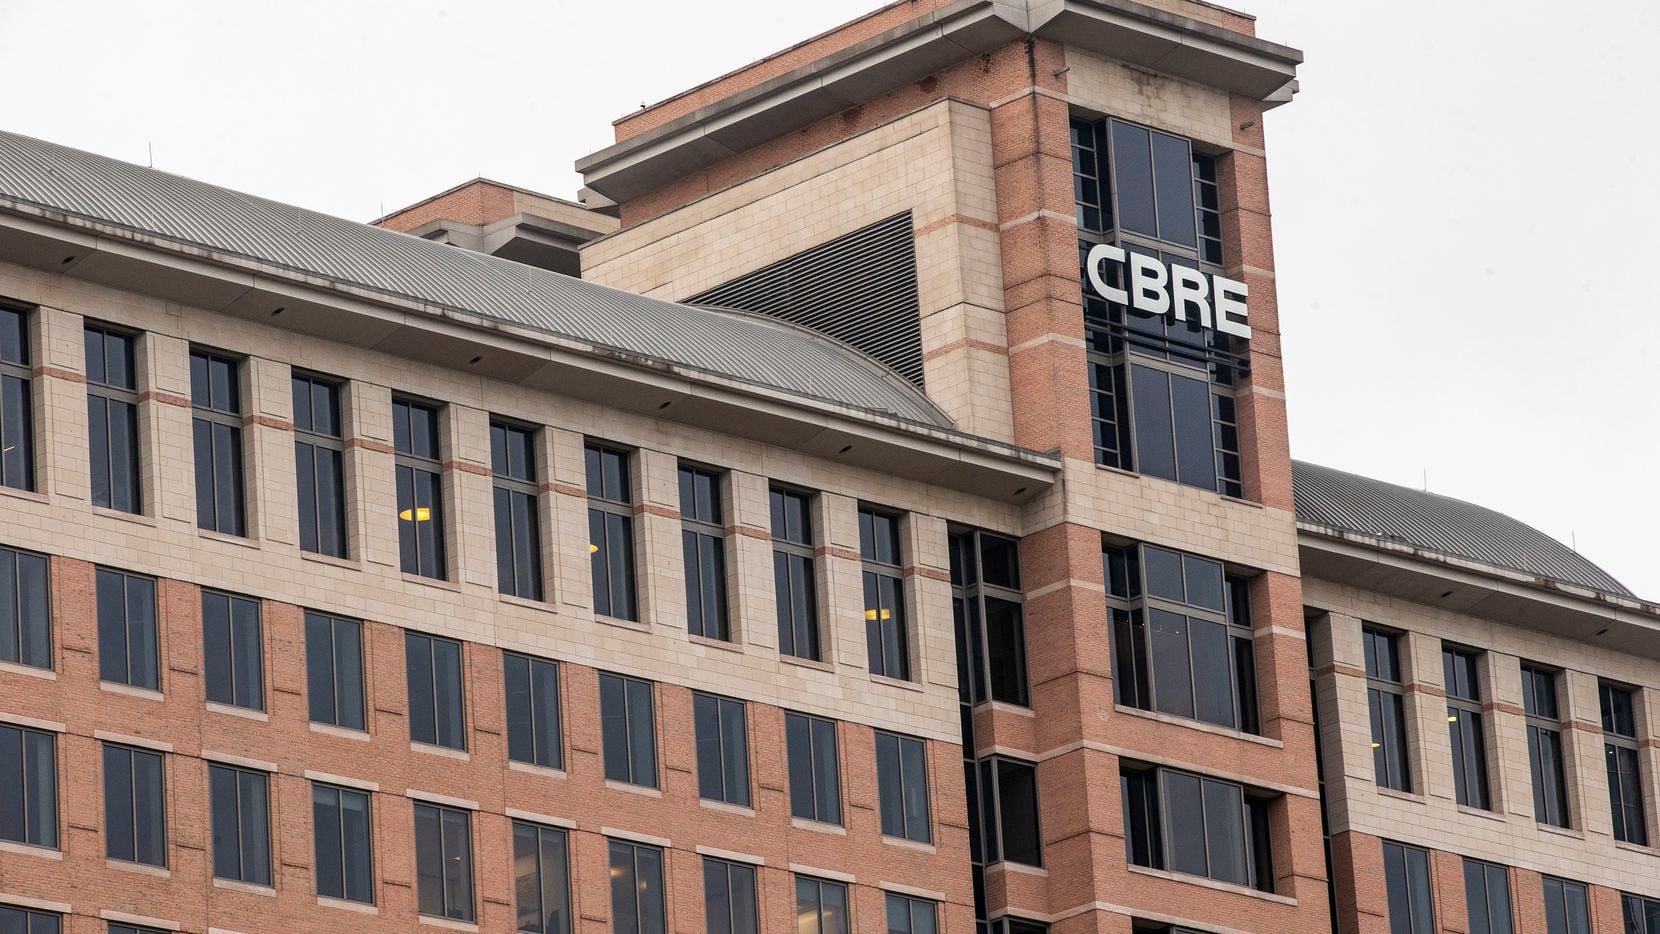 CBRE's headquarters will be in the 2100 McKinney tower in Dallas' Uptown district.